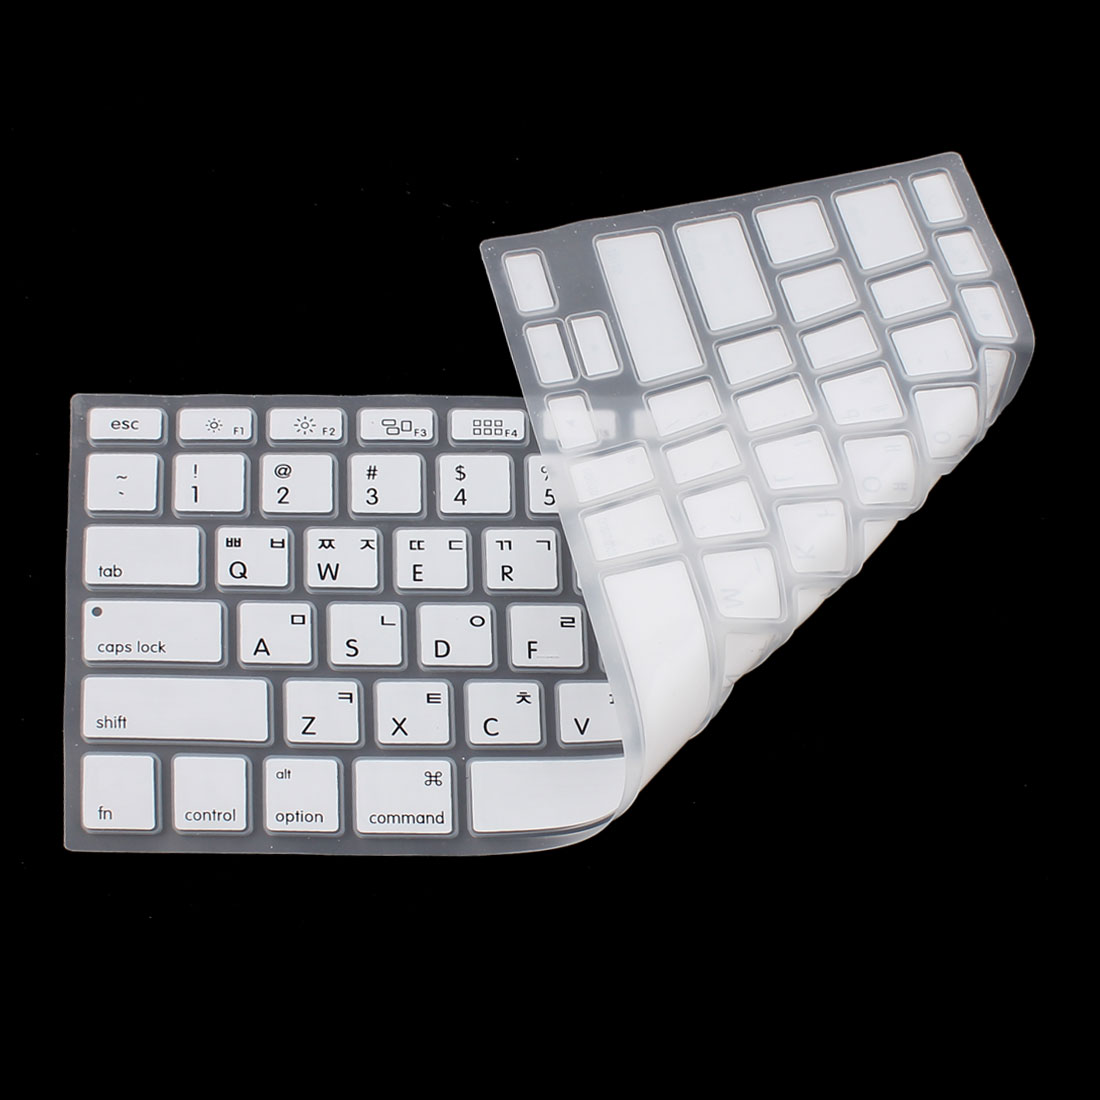 What Does Flexible Silicone Keyboard Mean? The ideal foldable silicone keyboard can provide a durable, easy-to-clean and offers typing comfort that is on par with a conventional keyboard. These keyboards are suitable for use in places where traditional keyboards would be dangerous or difficult to keep clean. Flexible, soft, collapsible, rollable, quiet, resistant to dust and water, lightweight, transportable, and easy to store Constructed of silicone gel, which is non-toxic, odourless, and has a high degree of flexibility and intensity. Because the flexible material can be folded or rolled up at will, it is beneficial and practical to carry with a notebook, laptop, or Mac. Because it is more durable and portable than traditional keyboards, this keyboard is seen as the computer's keyboard of the future. Because it is softer and feels more natural, this keyboard is also believed to be more comfortable. What is meant by a silicone keyboard? Chemically, silicones are synthetic organosilicon polymers based on siloxane. Natural silicones are odourless, chemically inert silicones widely utilized in agriculture, the food industry, and aquariums. Because of their chemical inertness, they have no adverse effects on health. Another type of silicone used in construction and industry is specialty silicone. Among these are silicones for glazing, silicones for high temperatures, and silicones for building. Most of them were developed with a particular objective in mind. High-temperature silicones are distinguished by their strong resilience to extreme temperatures. They keep their structure and properties even when exposed to extremely high temperatures. The Most Vital Considerations when Purchasing a Foldable Silicone Keyboard: You may customize your keyboard. One of its best features is the ability of makers of flexible silicone keyboard to customize your keyboard to meet your specific needs. No matter the critical layout or number of keys you need, a flexible silicone keyboard manufacturer can create the perfect keyboard for you. They are robust due to the durability of flexible silicone keyboards, and you won't need to worry about replacing your keyboard anytime soon. The finest silicone available is used to create their keyboard, and they use cutting-edge technology to ensure it will last for a long time. Keyboards are also thinner and more comfortable to use. The foldable silicone keyboard has significant characteristics: Keyboards constructed of flexible silicone are light, sturdy, water-resistant, and easy to repair. They provide good tactile input when typing. With its innovative design, the keys can be easily changed in size so that users may adjust them to fit their fingertips. As a result of its smooth touch, it is easy to push and cozy to hold. The majority of people now communicate primarily through their cell phones. Maintaining our standard of living has become necessary. Customer relations:  Flexible silicone-made keyboards of a new generation have come. These keyboards are made to be used standing up, sitting down, or even while lying down. It has been expertly created and is composed of premium silicone material. They are made to be sturdy and last for years. The greatest customer service is what we offer. The medical, food processing, pharmaceutical, electronics, and other sectors utilize our goods extensively. Requires less maintenance:  It is made of high-quality silicone components, environmentally friendly, non-toxic, flavourless, and secure. Fully sealed, radiation-proof, readily cleanable, and water-proof construction. It has a trendy appearance and a slick design.  Top quality:  The best silicone keyboards are constructed with premium components and put to the test by our professionals. They are also simple to maintain and clean. A decent keyboard needs to be useful, sturdy, and pleasant. The material used to make the greatest flexible silicone keyboard by BRT allows for nearly unrestricted movement while typing. Trustworthiness:  The new finest Flexible Keyboard is an excellent replacement for conventional keyboards and is made to be more ergonomic and comfy. Anyone who types for extended periods needs a dependable keyboard. Capabilities of the foldable Silicone Keyboard: A silicon keyboard is a synthetic polymer mainly consisting of silicon and oxygen atoms. Due to its softness, flexibility, heat resistance, chemical stability, low density, high strength, and excellent electrical insulation, it is well-suited for various applications. Due to their excellent performance, the demand for silicone keyboard products has significantly increased in recent years.  They have so far been made in many different forms. One of the most popular varieties of them is the silicone keyboard. Silicone keyboards are essential to cellular phones, computers, cars, toys, and other products. Daily life regularly makes use of it. From work to gaming, there's a reason why most people love using smartphones or tablets: they're helpful, portable, and BRT has a suitable foldable silicone keyboard to fit your standards: Since manufacturers of flexible silicone keyboards provide a variety of models, it should be easy to choose the keyboard that best suits your needs. When selecting the finest flexible silicone keyboard manufacturer, there are a few factors to consider. It would be best to look at the manufacturer's collection of designs. This will help you choose the keyboard that best suits your needs. The manufacturer's warranty is the second item you should look at. By doing this, you can be sure that you will be safeguarded if your keyboard is damaged. Conclusion: We are committed to providing our customers with the best items at fair rates. BRT is the leading supplier of foldable silicone keyboard. All our products comply with global standards and are produced from premium components. It was created by a creative team of engineers with years of technological expertise. Users will be able to type comfortably, thanks to its development. We are thrilled to offer you the newest and top-quality goods. You should invest in the item you select. You can depend on us every time, not just once. Our primary objective is to fulfill all of your desires. Therefore, research it and get it right away if you want to take advantage of this product.